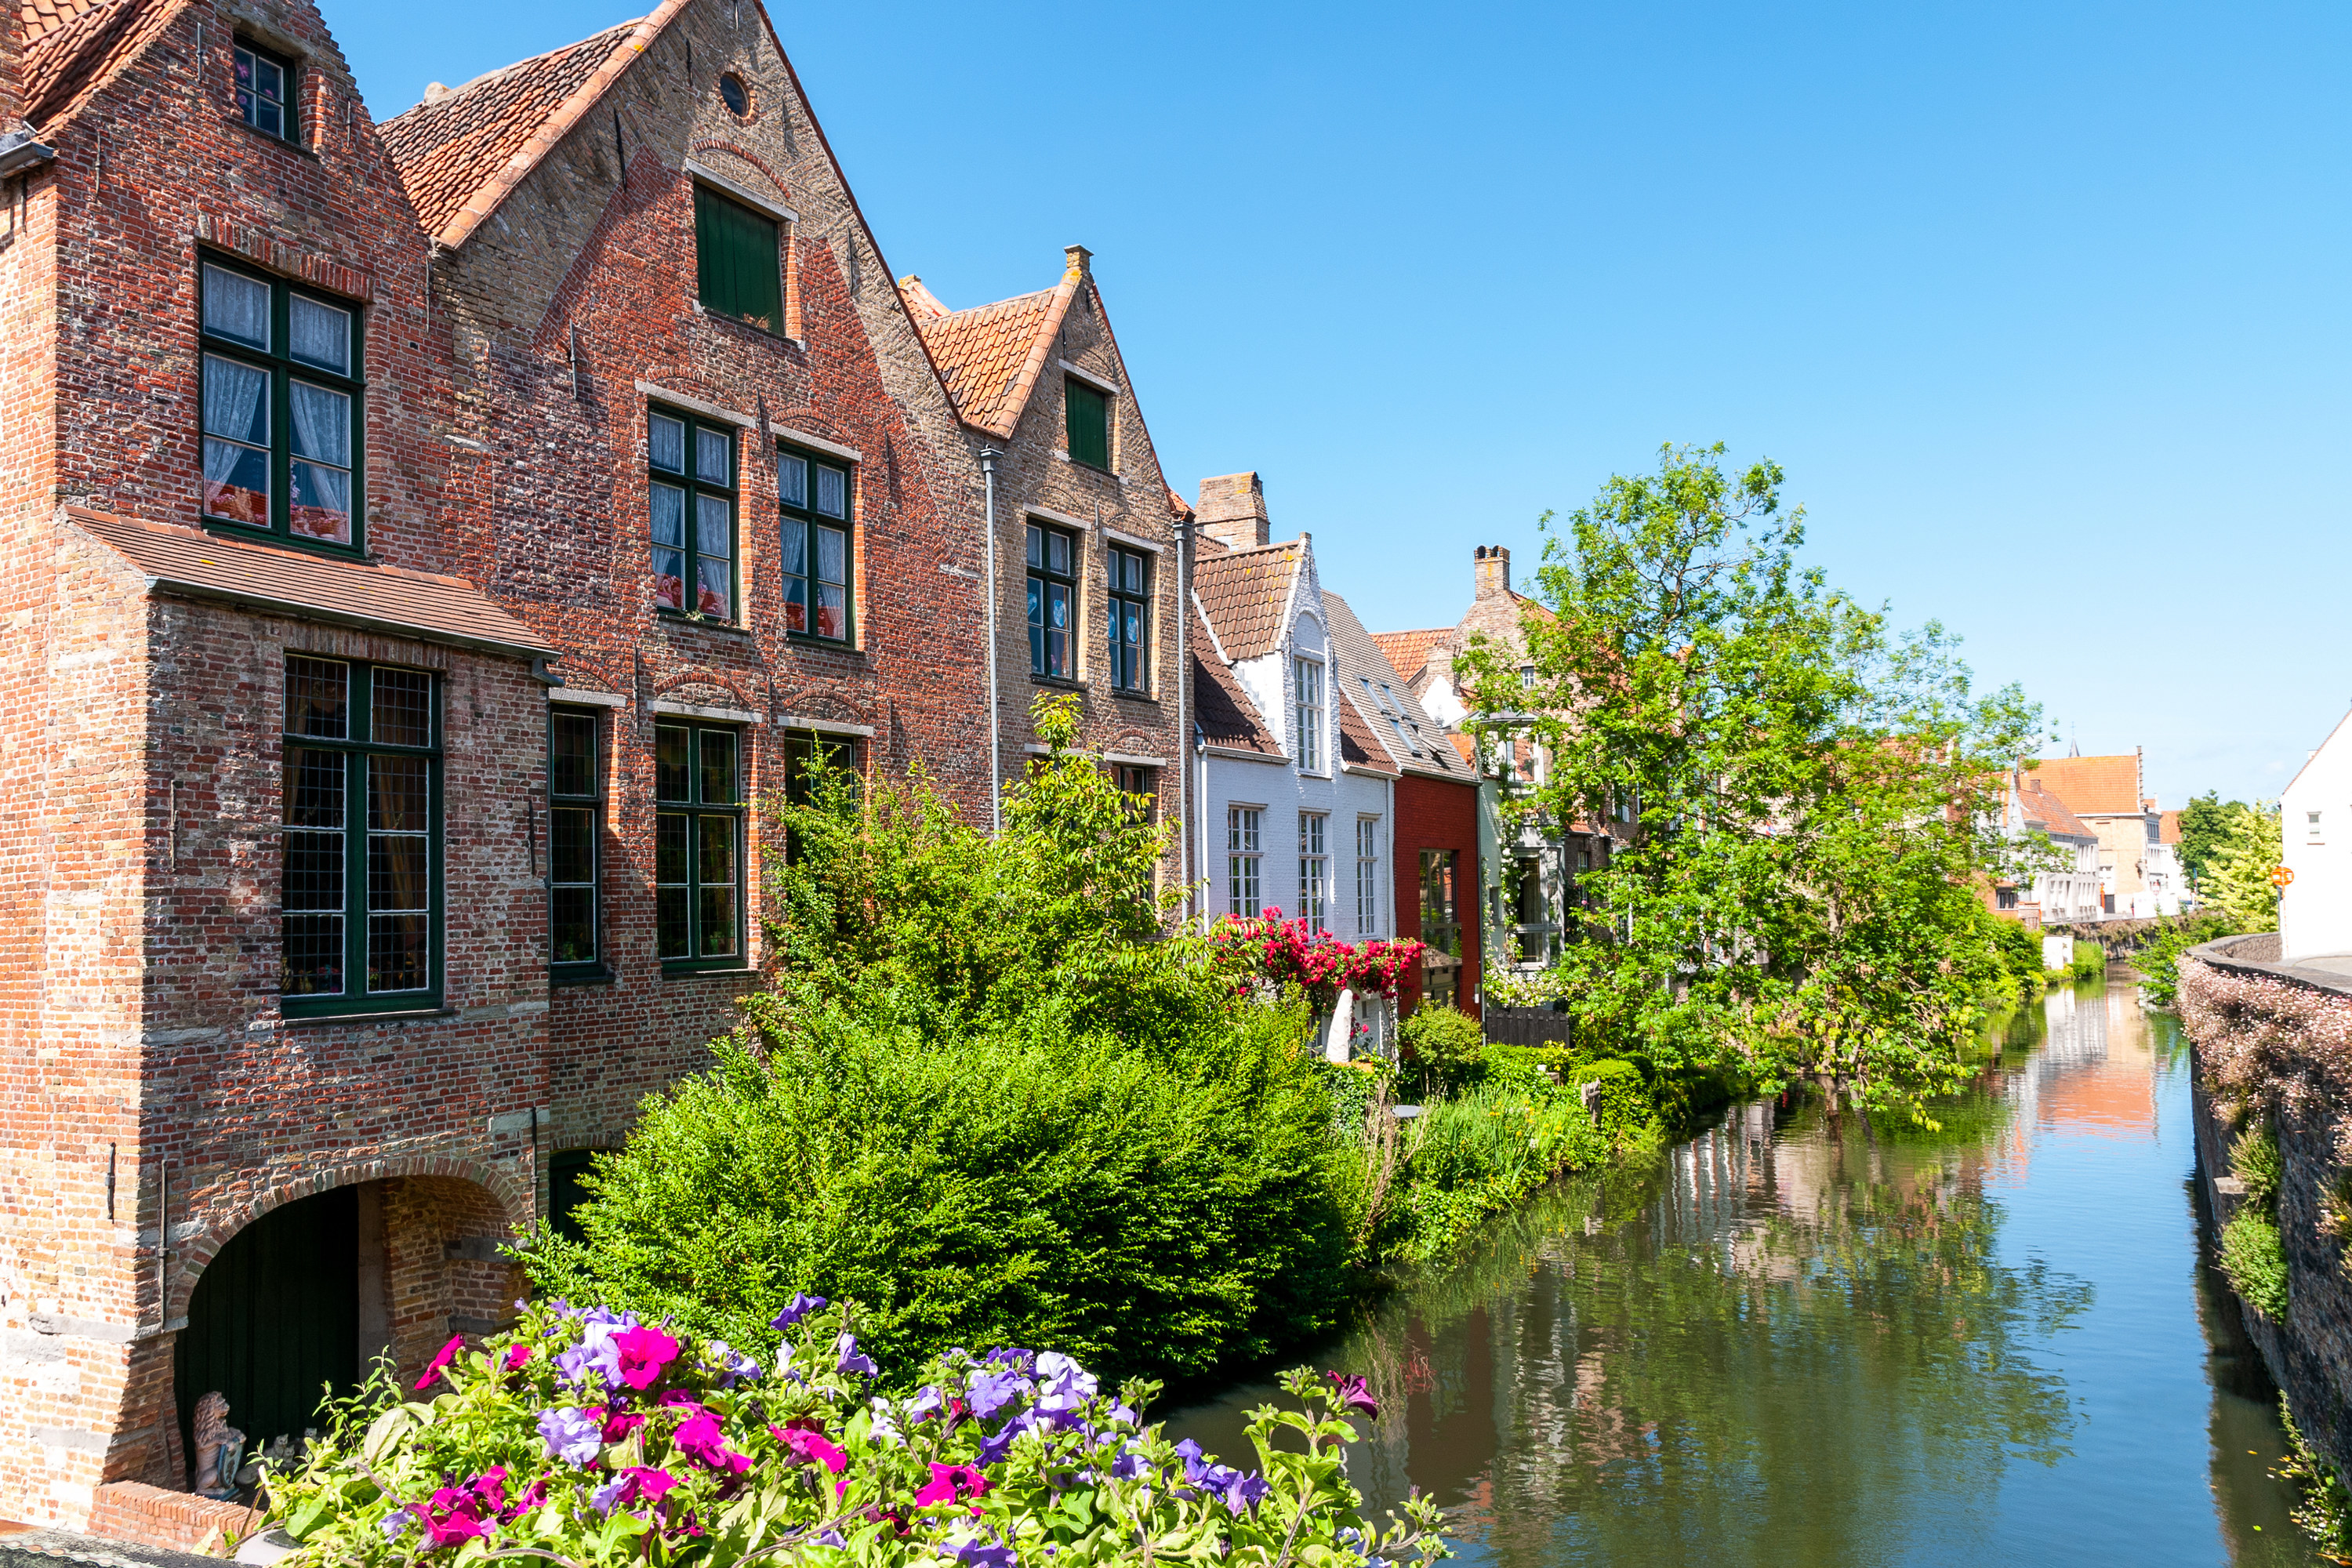 Old brick buildings beside a canal with flowers